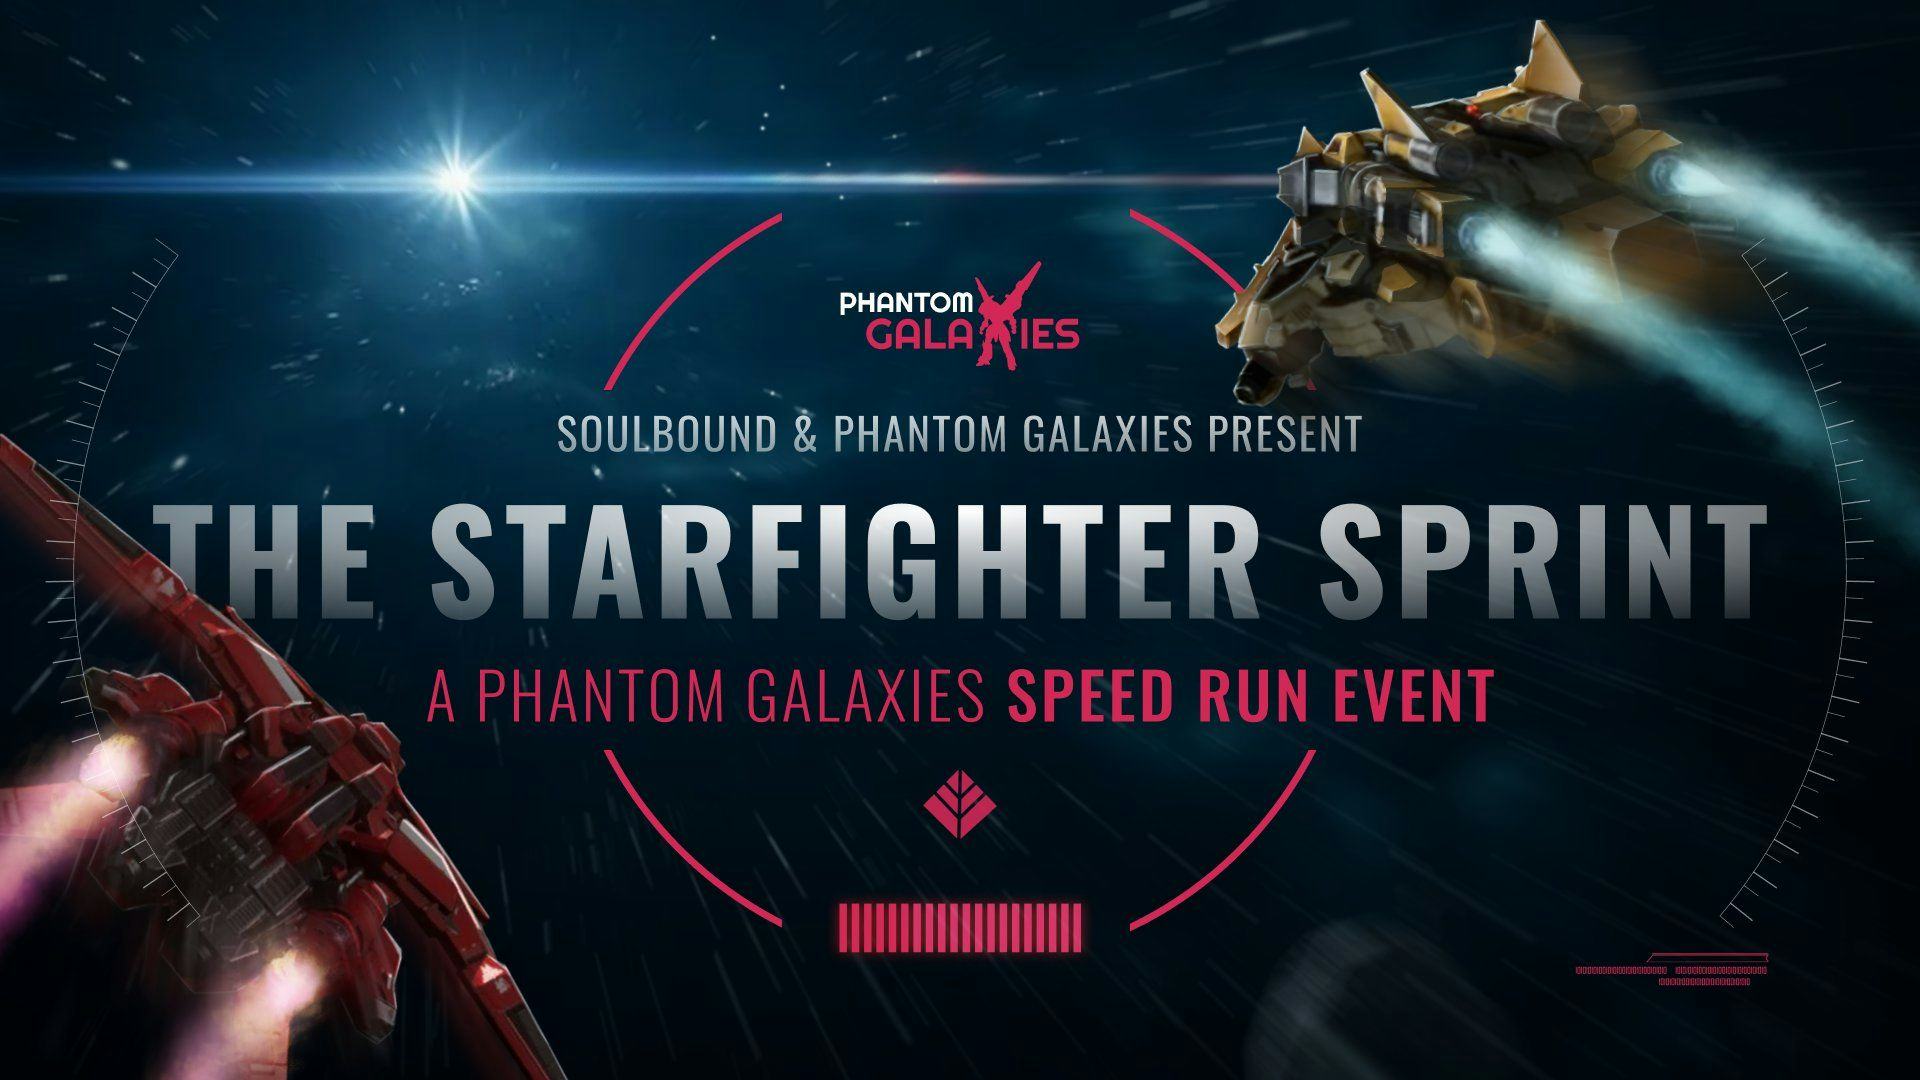 Phantom Galaxies Hosts Starfighter Sprint Campaign with Soulbound